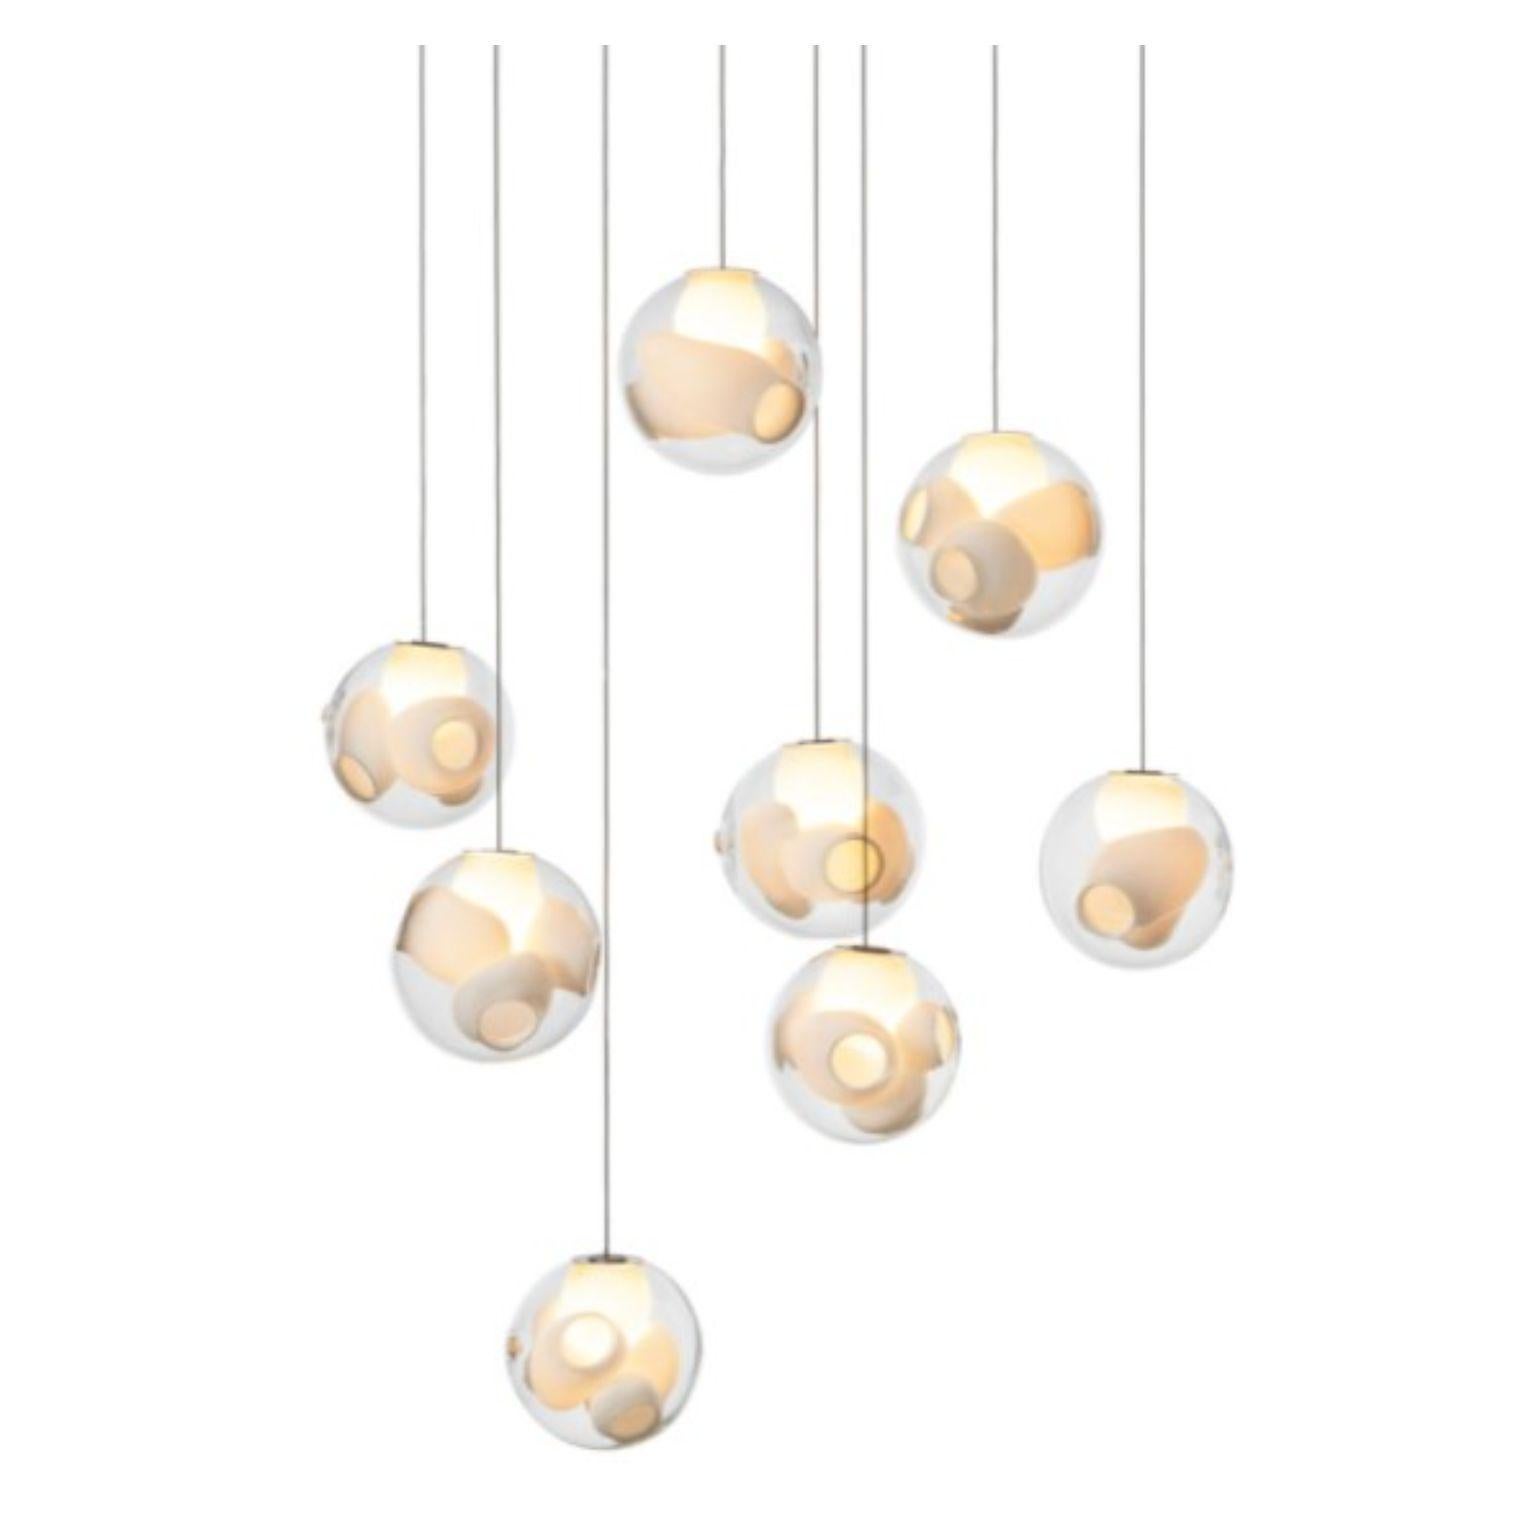 38.8 Pendant by Bocci
Dimensions: D 85 x W 28.4 x H 300 cm
Materials: white powder coated rectangular canopy
Weight: 27 kg
Also Available in different dimensions and models.

All our lamps can be wired according to each country. If sold to the